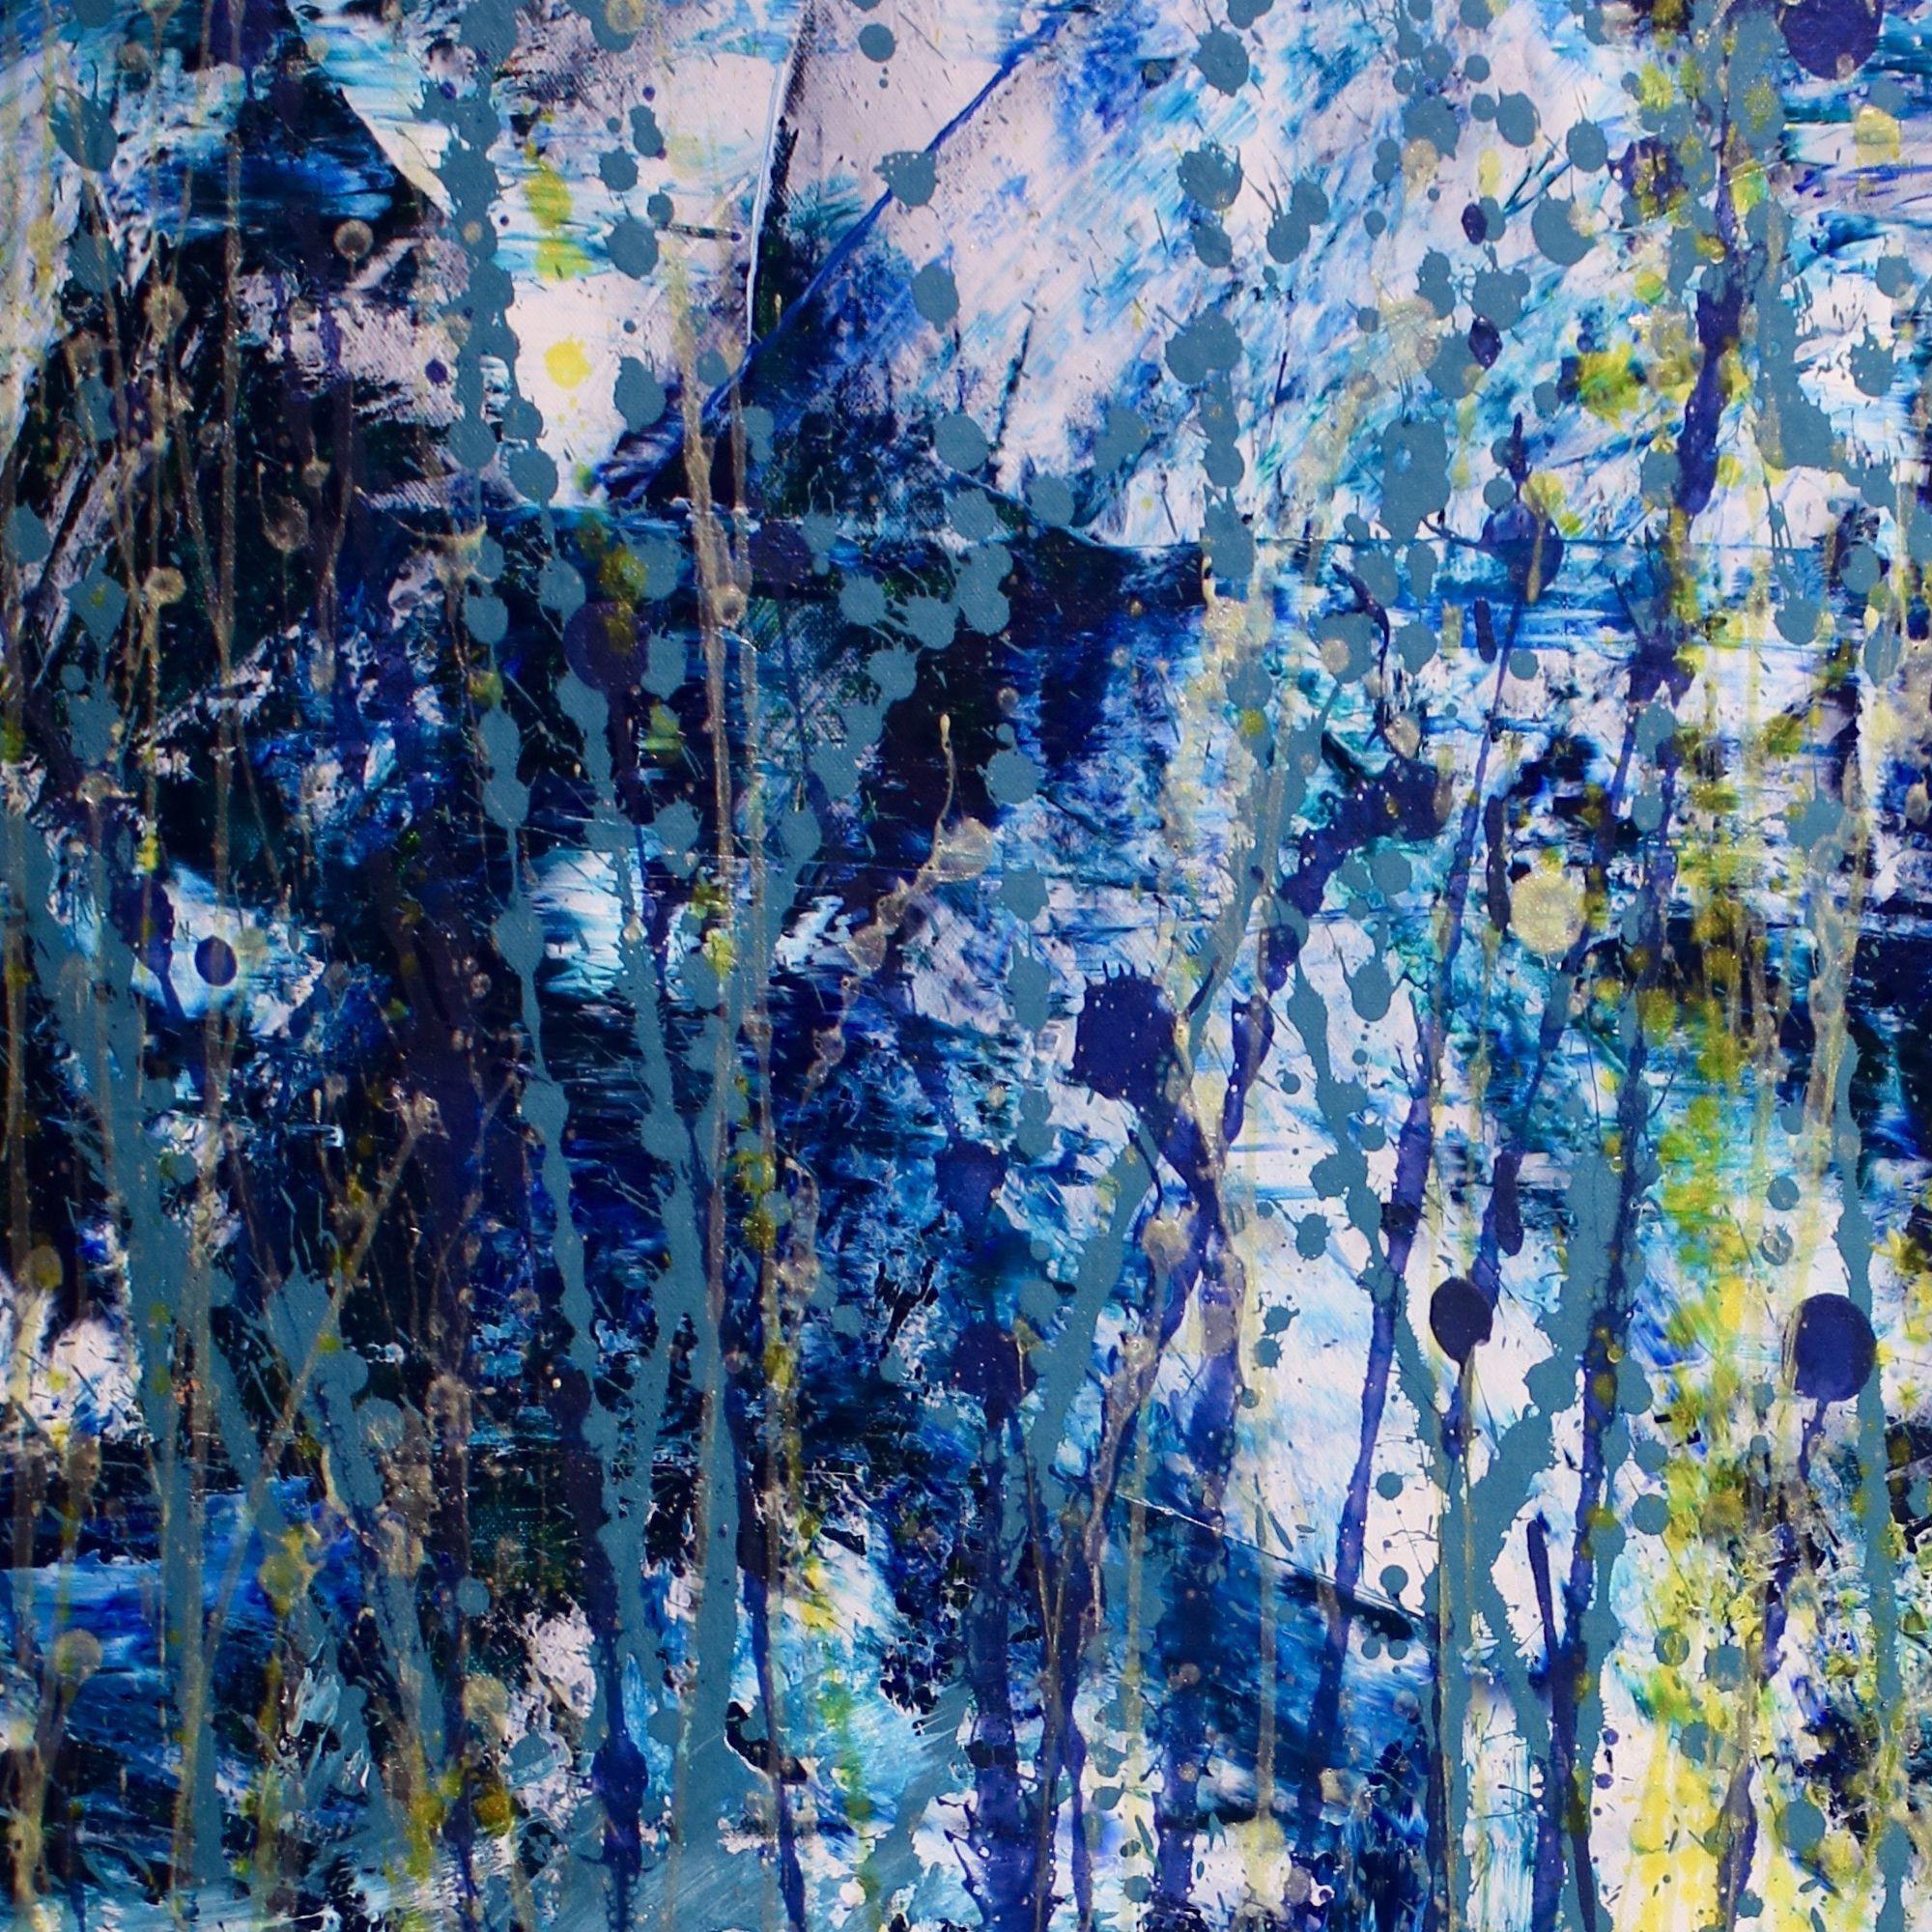 Azure Storm with Light, Painting, Acrylic on Canvas - Blue Abstract Painting by Nestor Toro